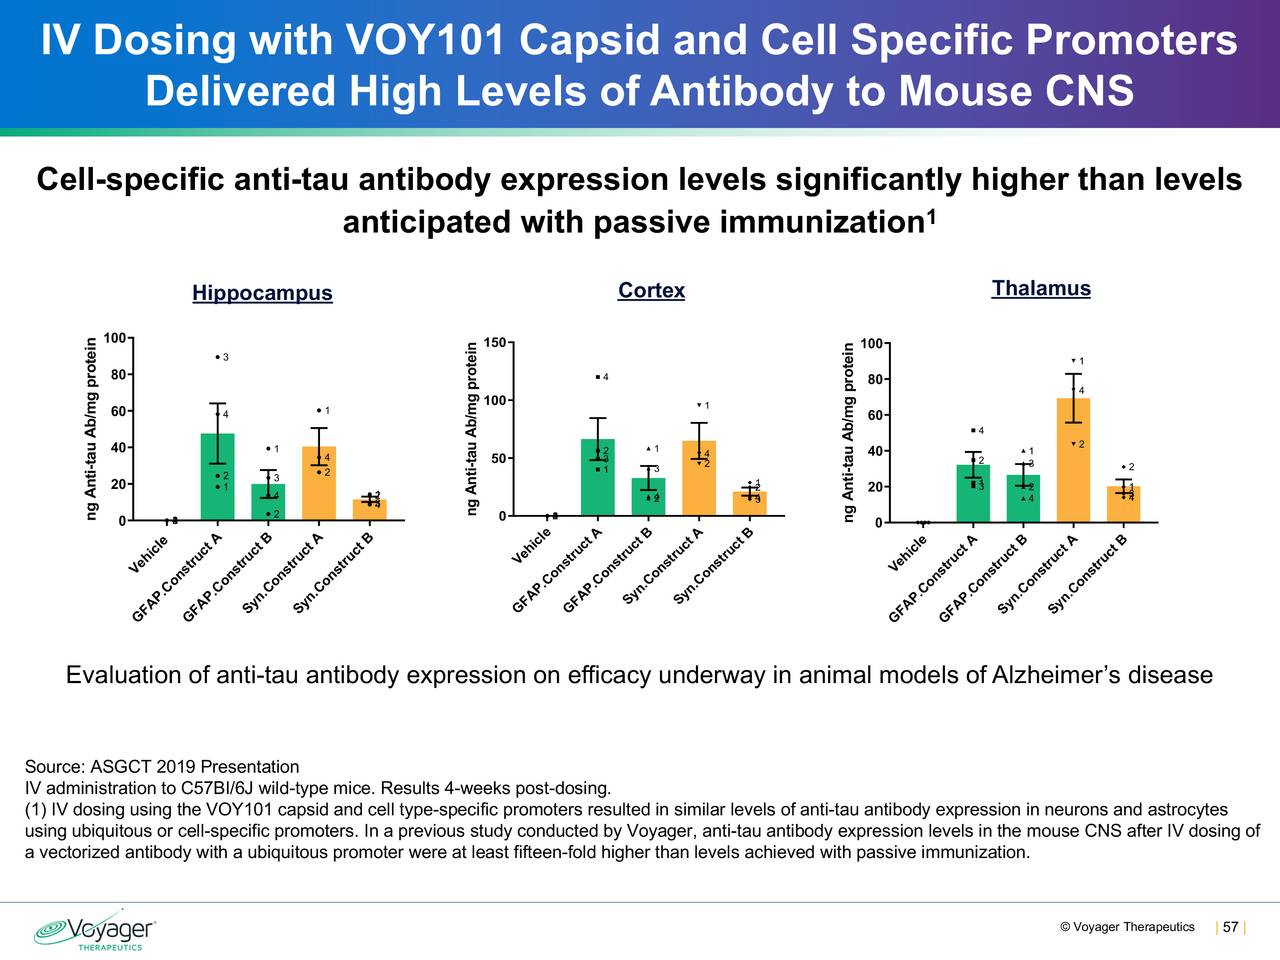 IV Dosing with VOY101 Capsid and Cell Specific Promoters